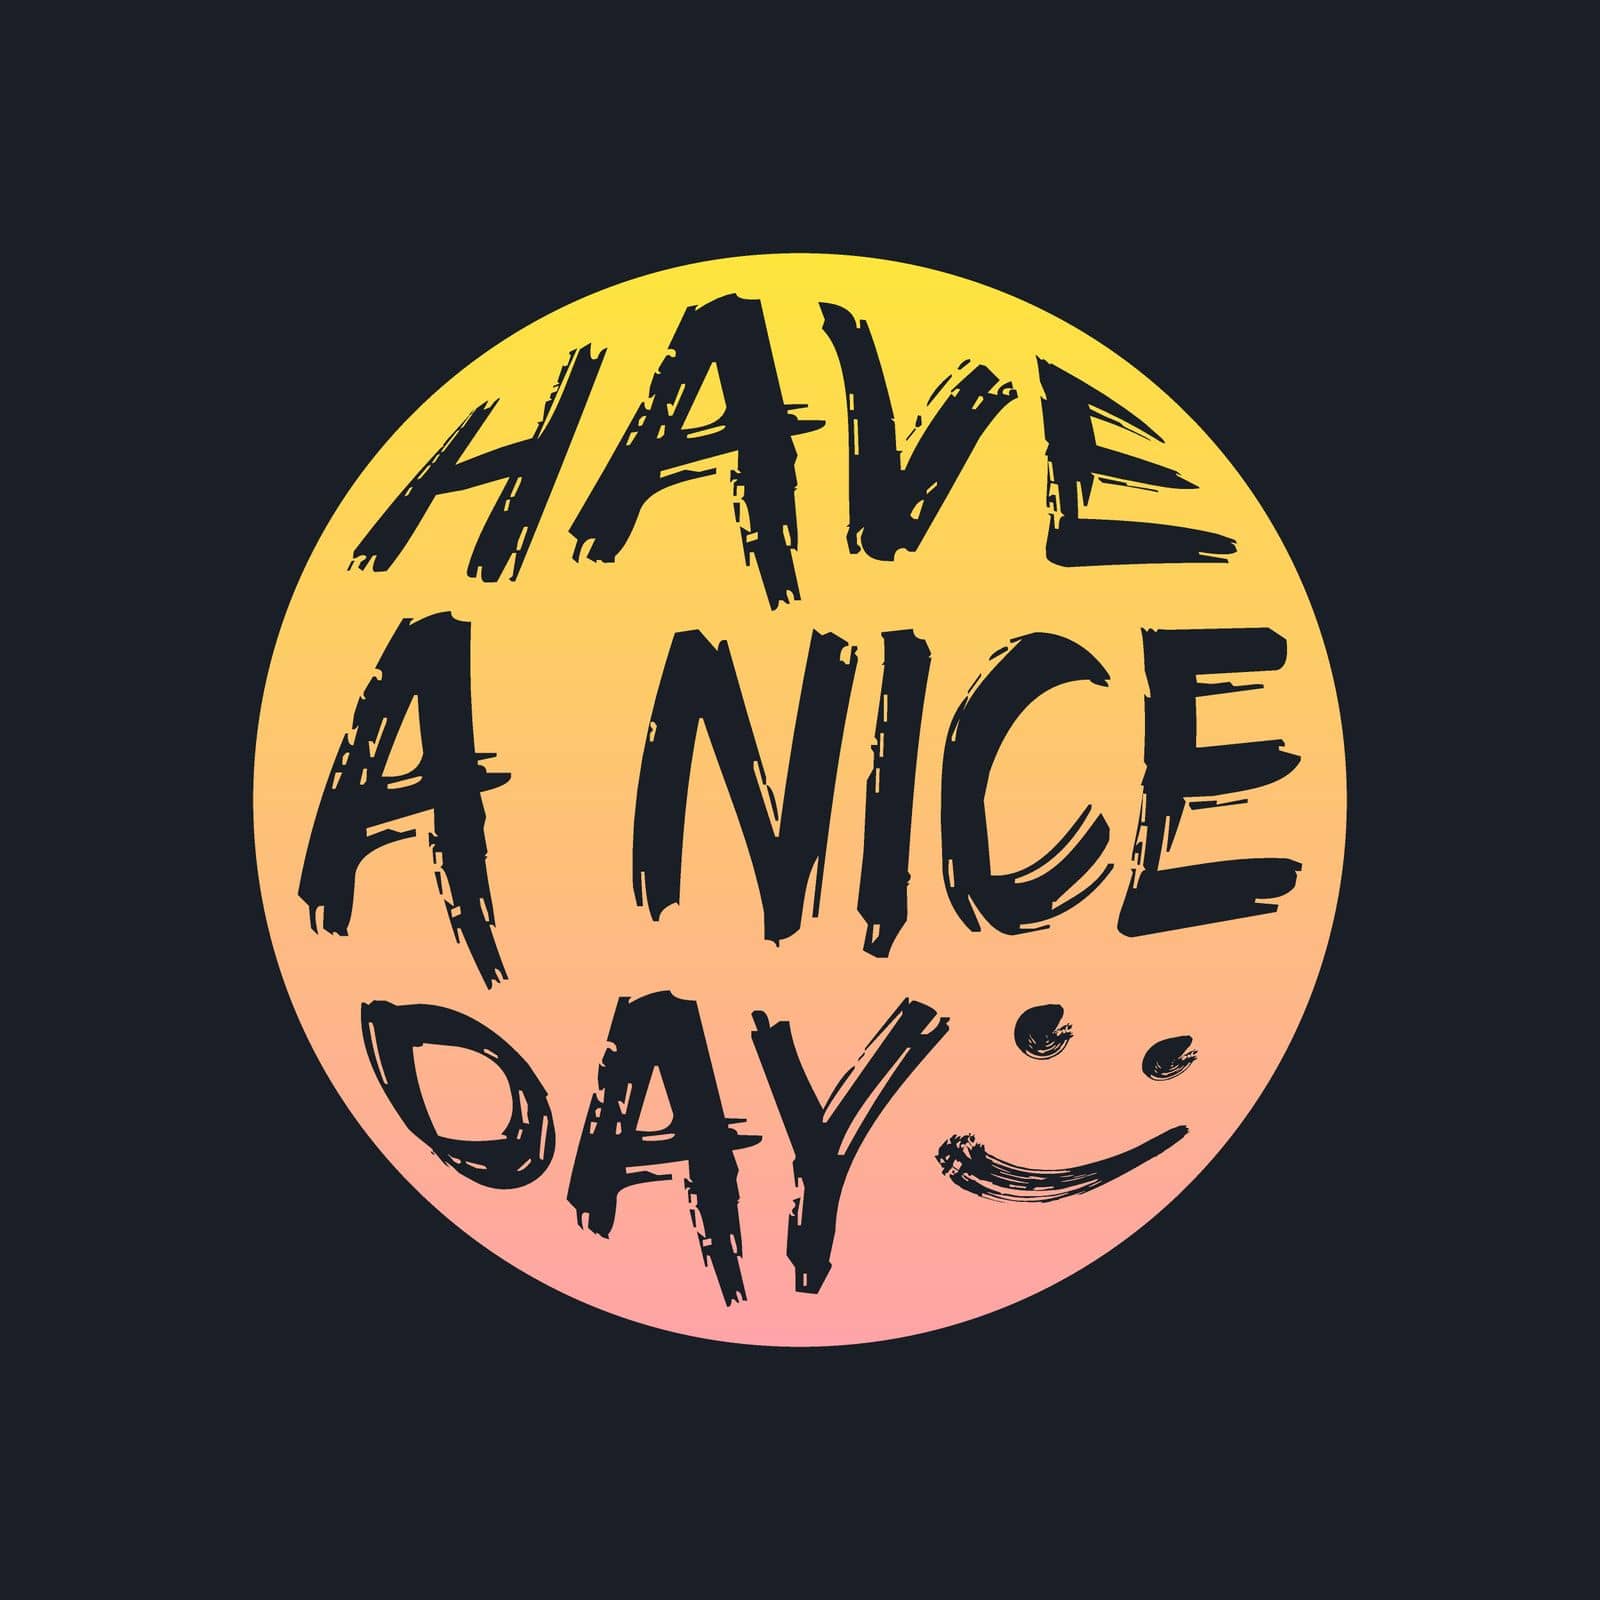 HAVE A NICE DAY, lettering typography in badge style design artwork. Editable, resizable, EPS 10, vector illustration.